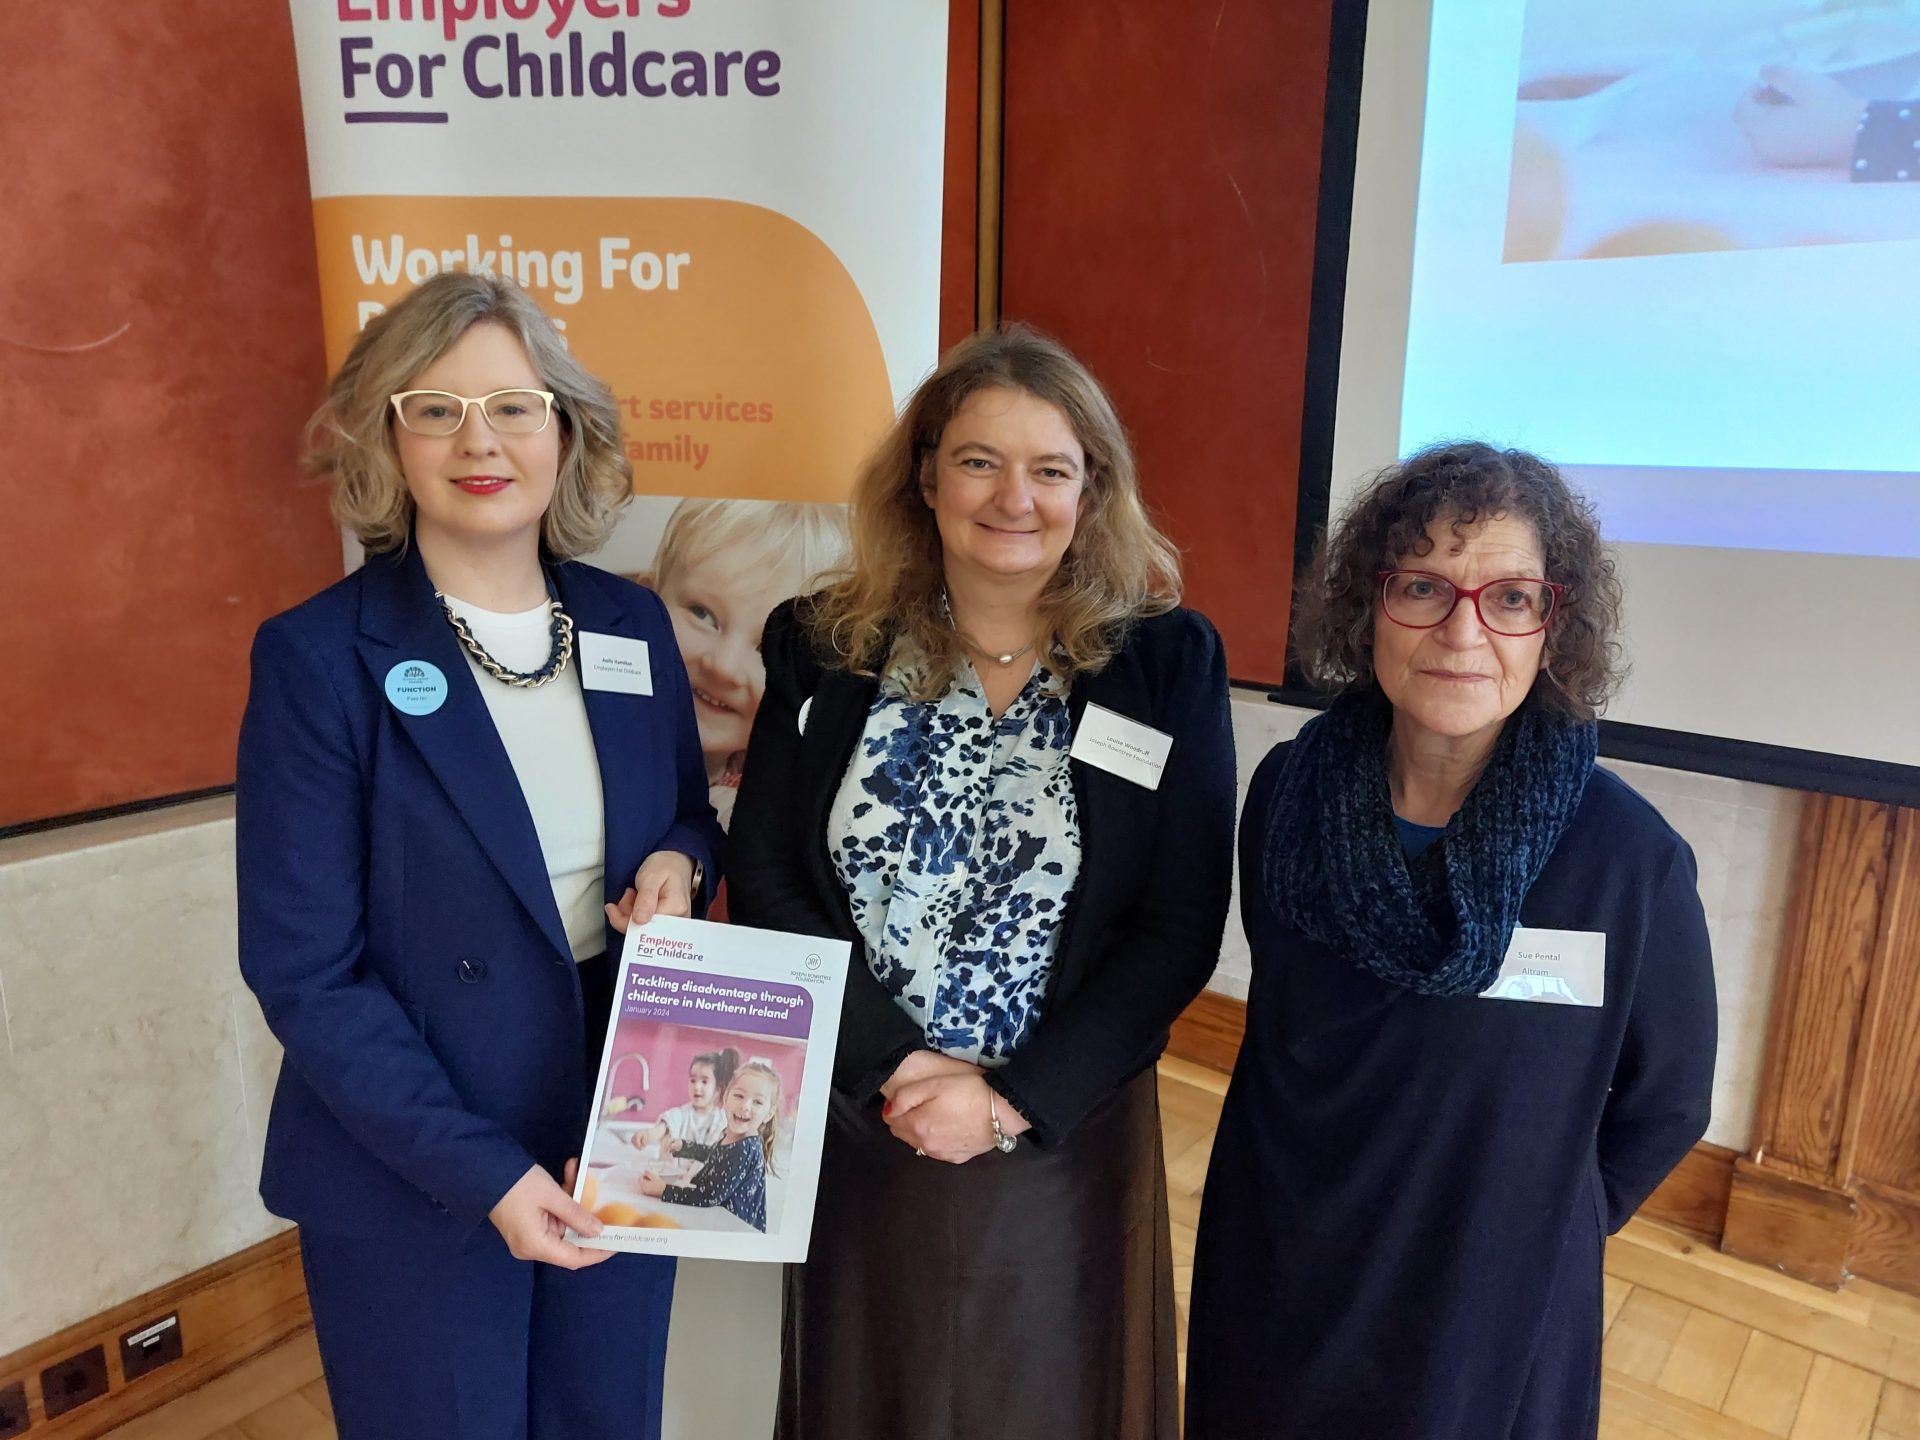 New briefing on tackling disadvantage through childcare launched at Stormont